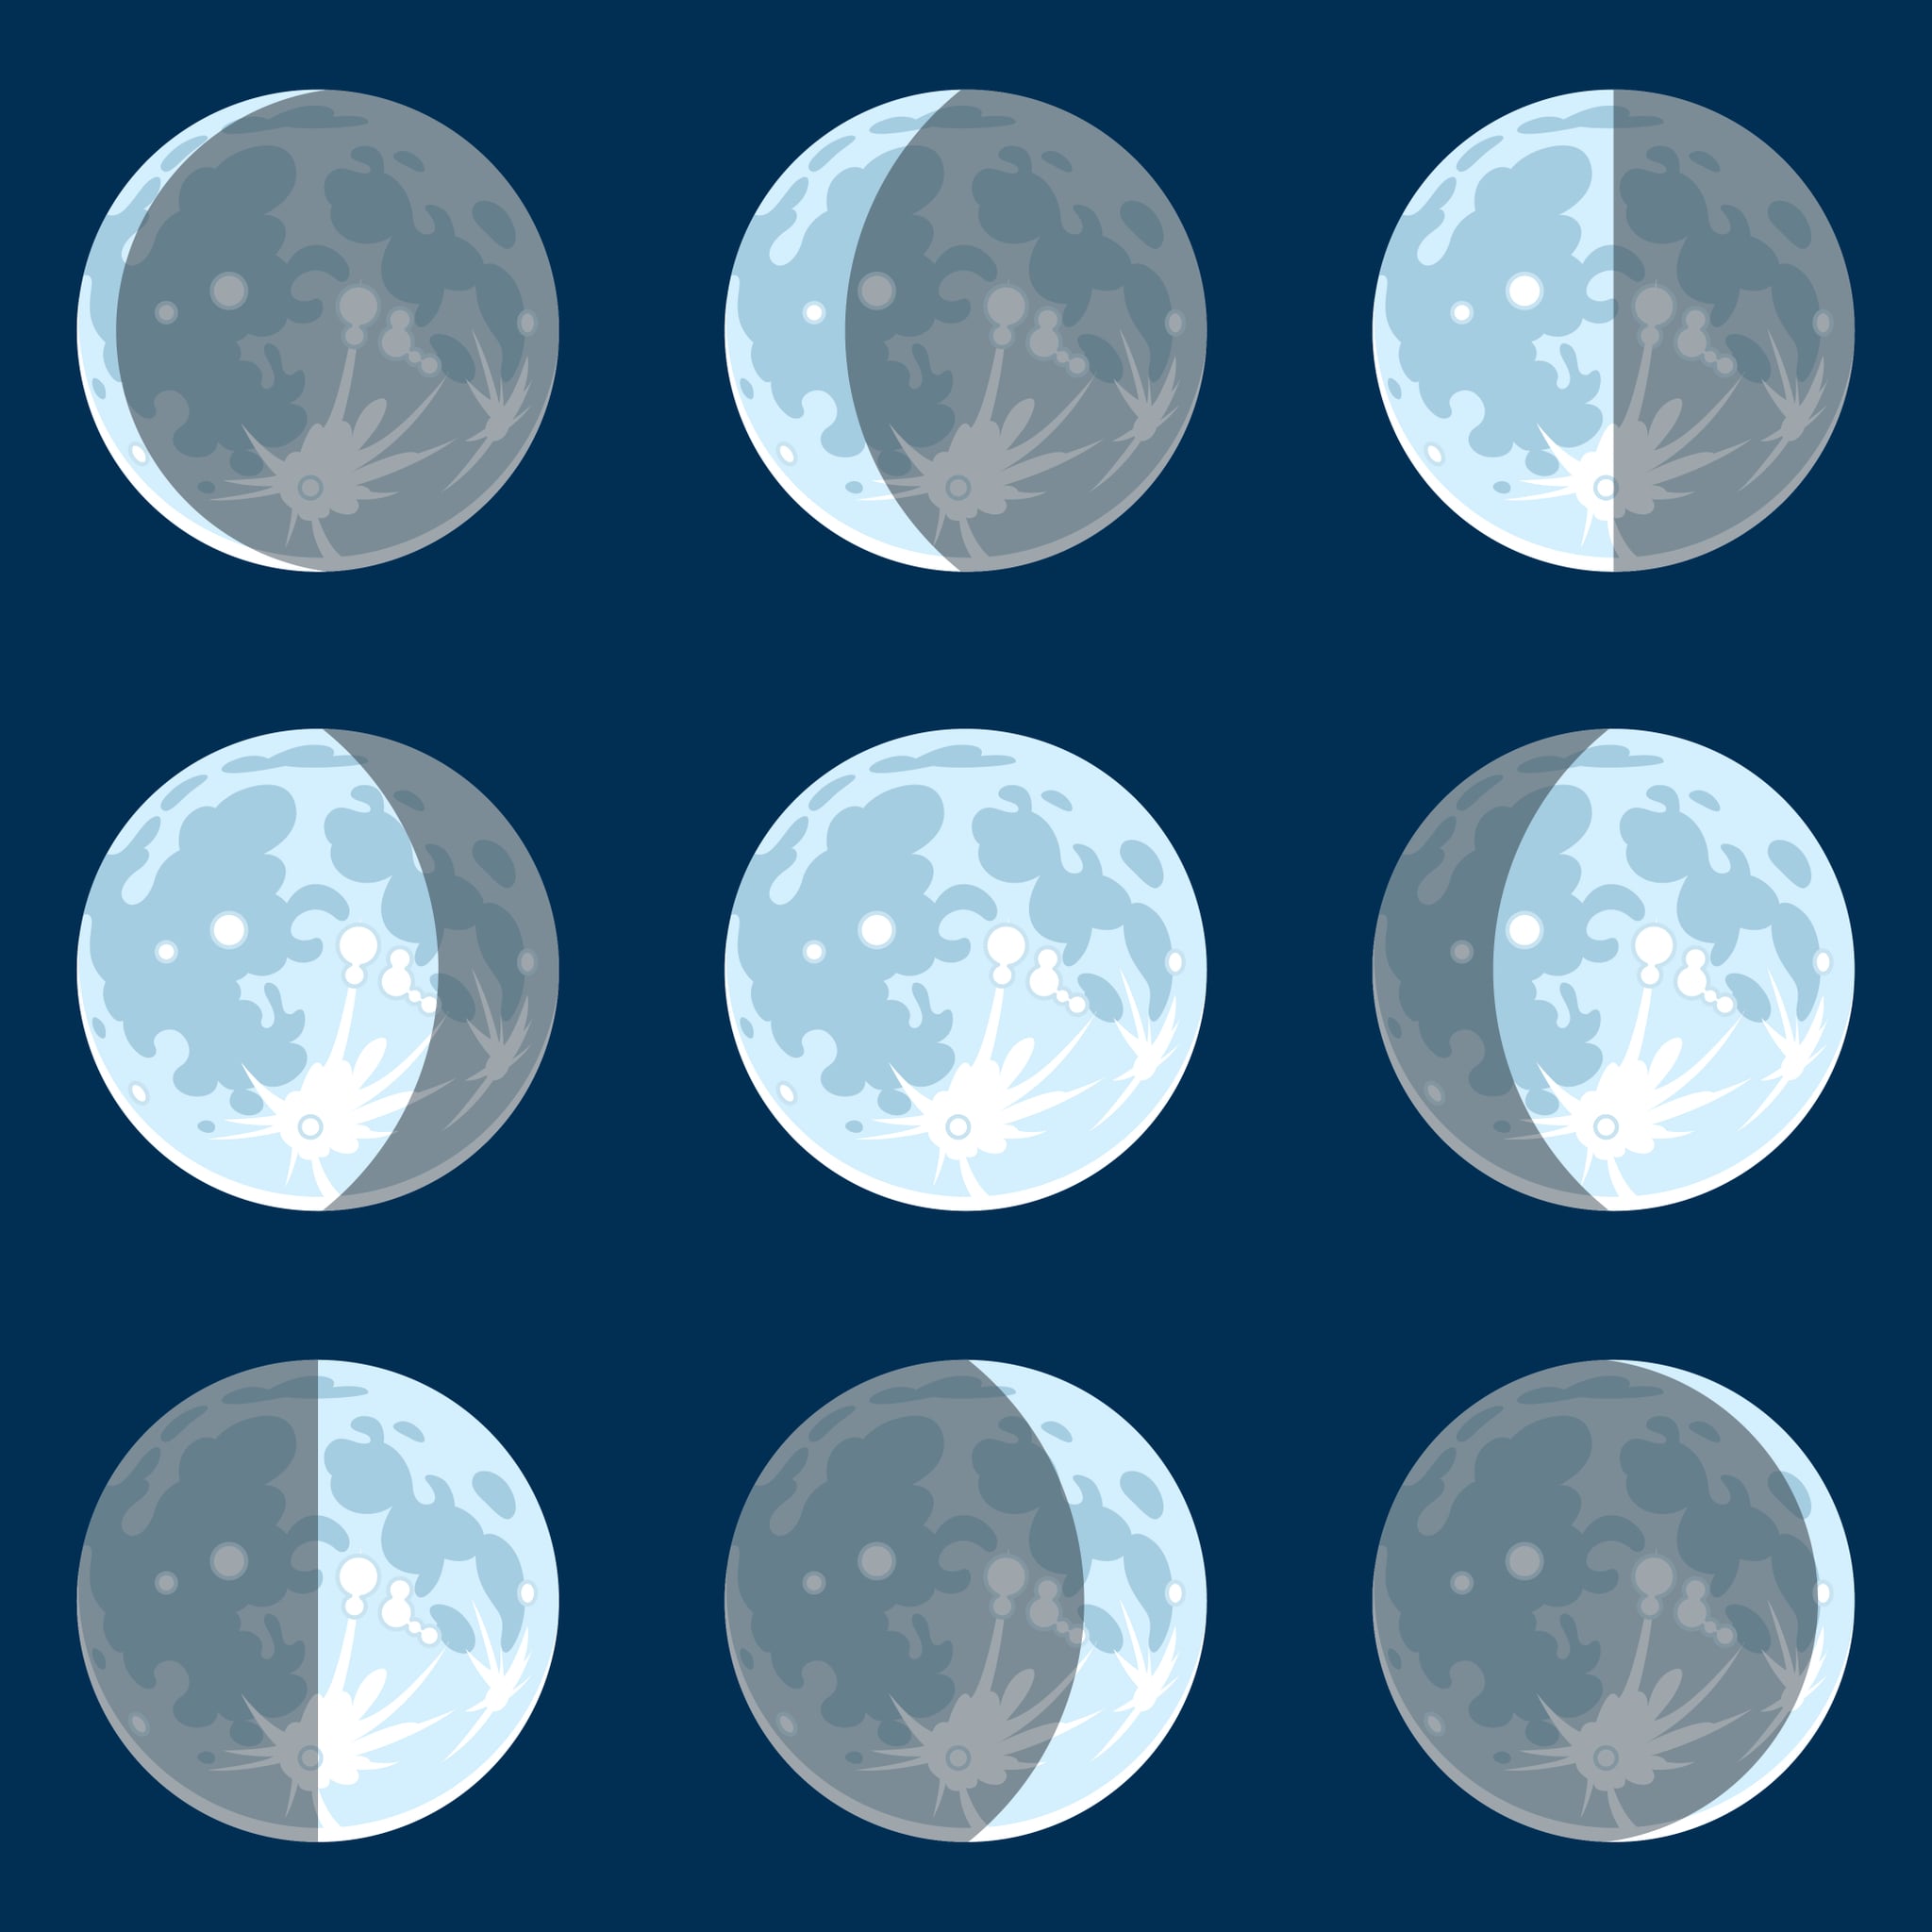 Vecter illustration of the moon phases